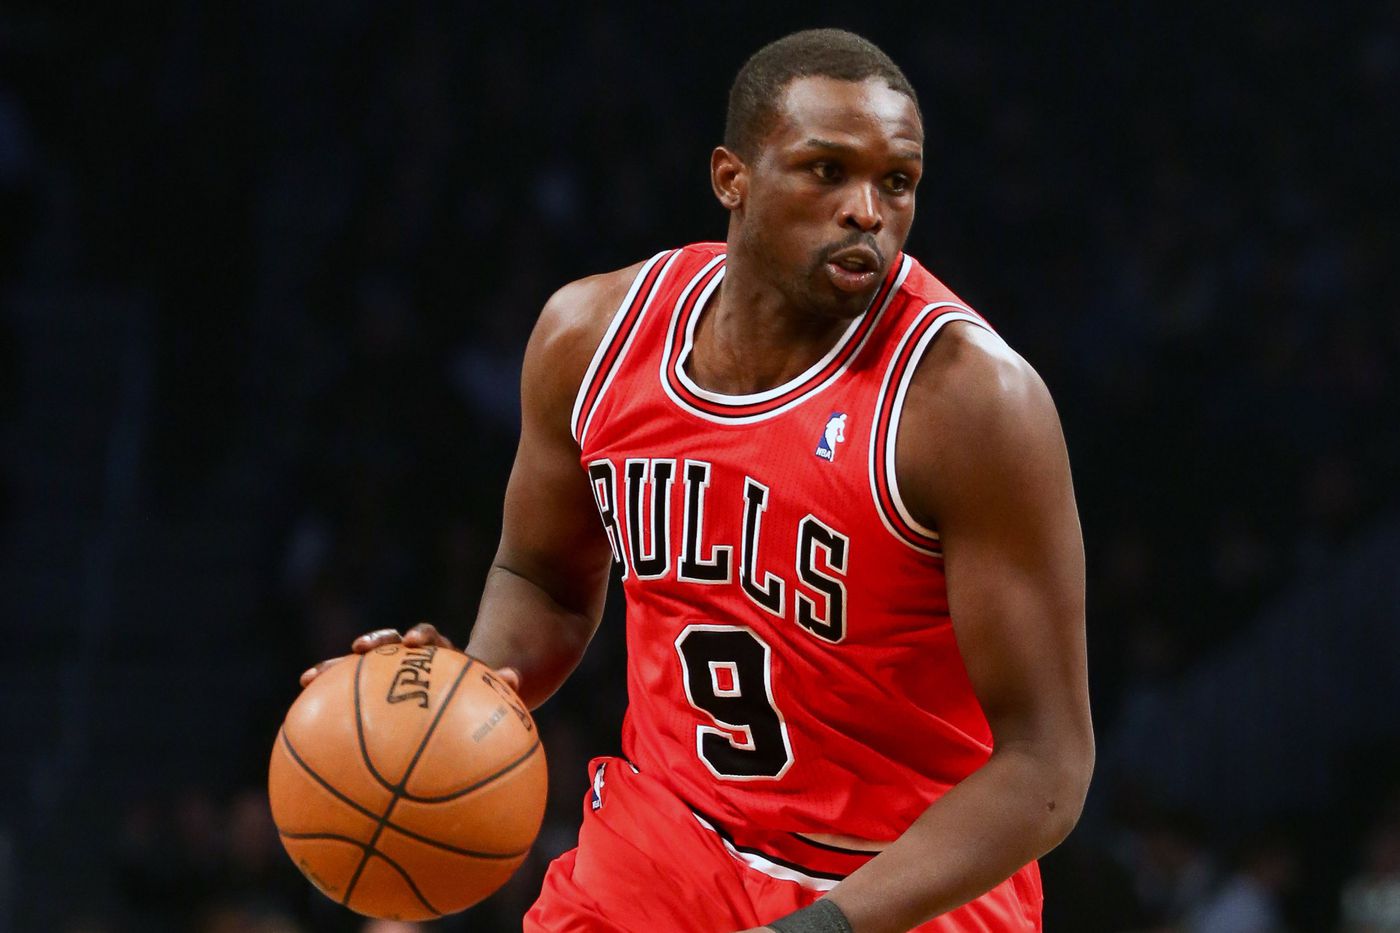 Luol Deng weaaring a red Chicago Bulls basketball jersey while dribbling the ball